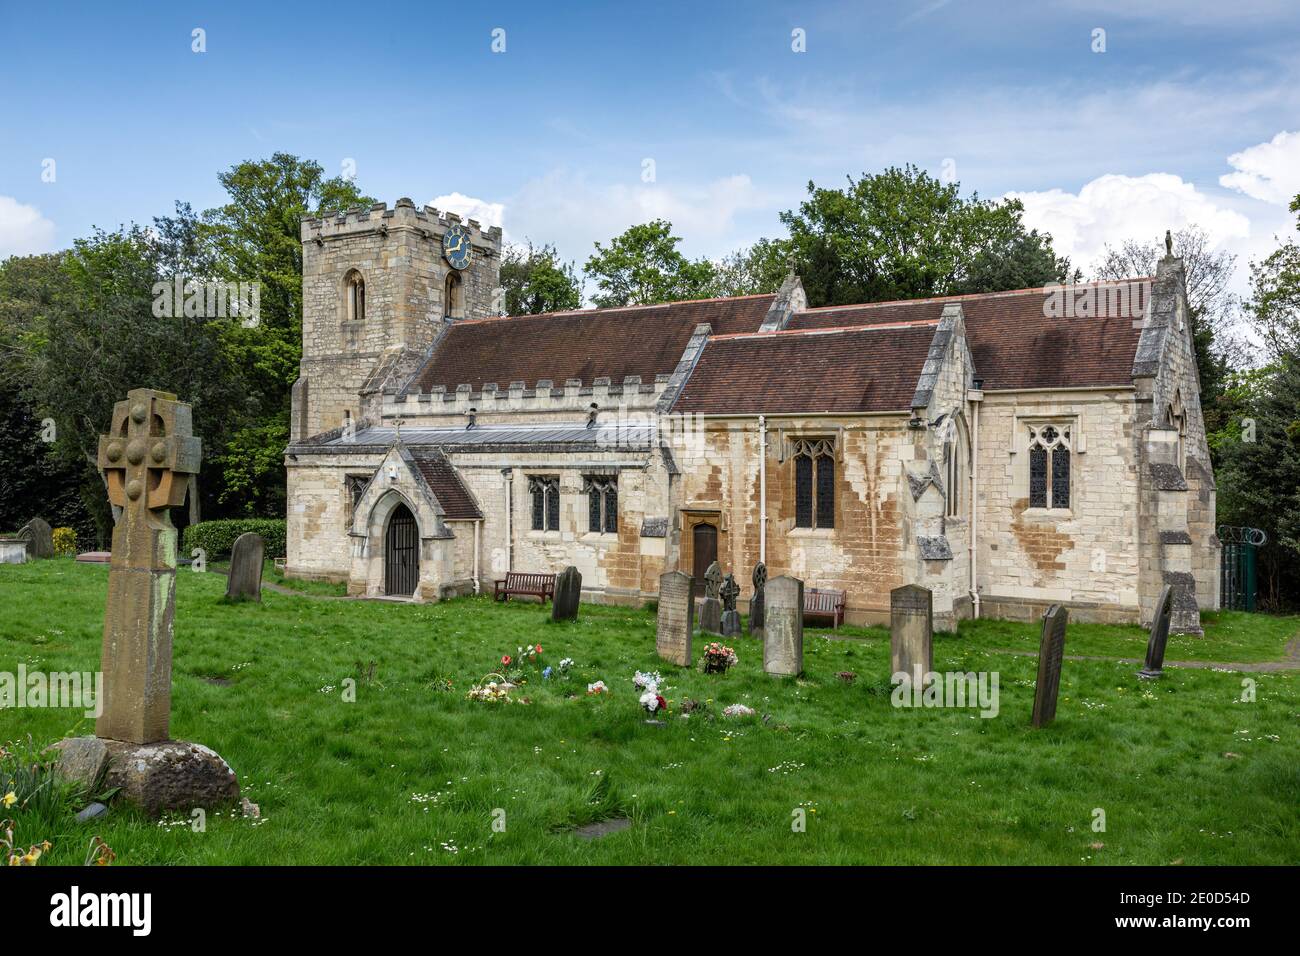 St Michael and All Angels Church, Brodsworth, Doncaster, South Yorkshire, England, UK. Stock Photo